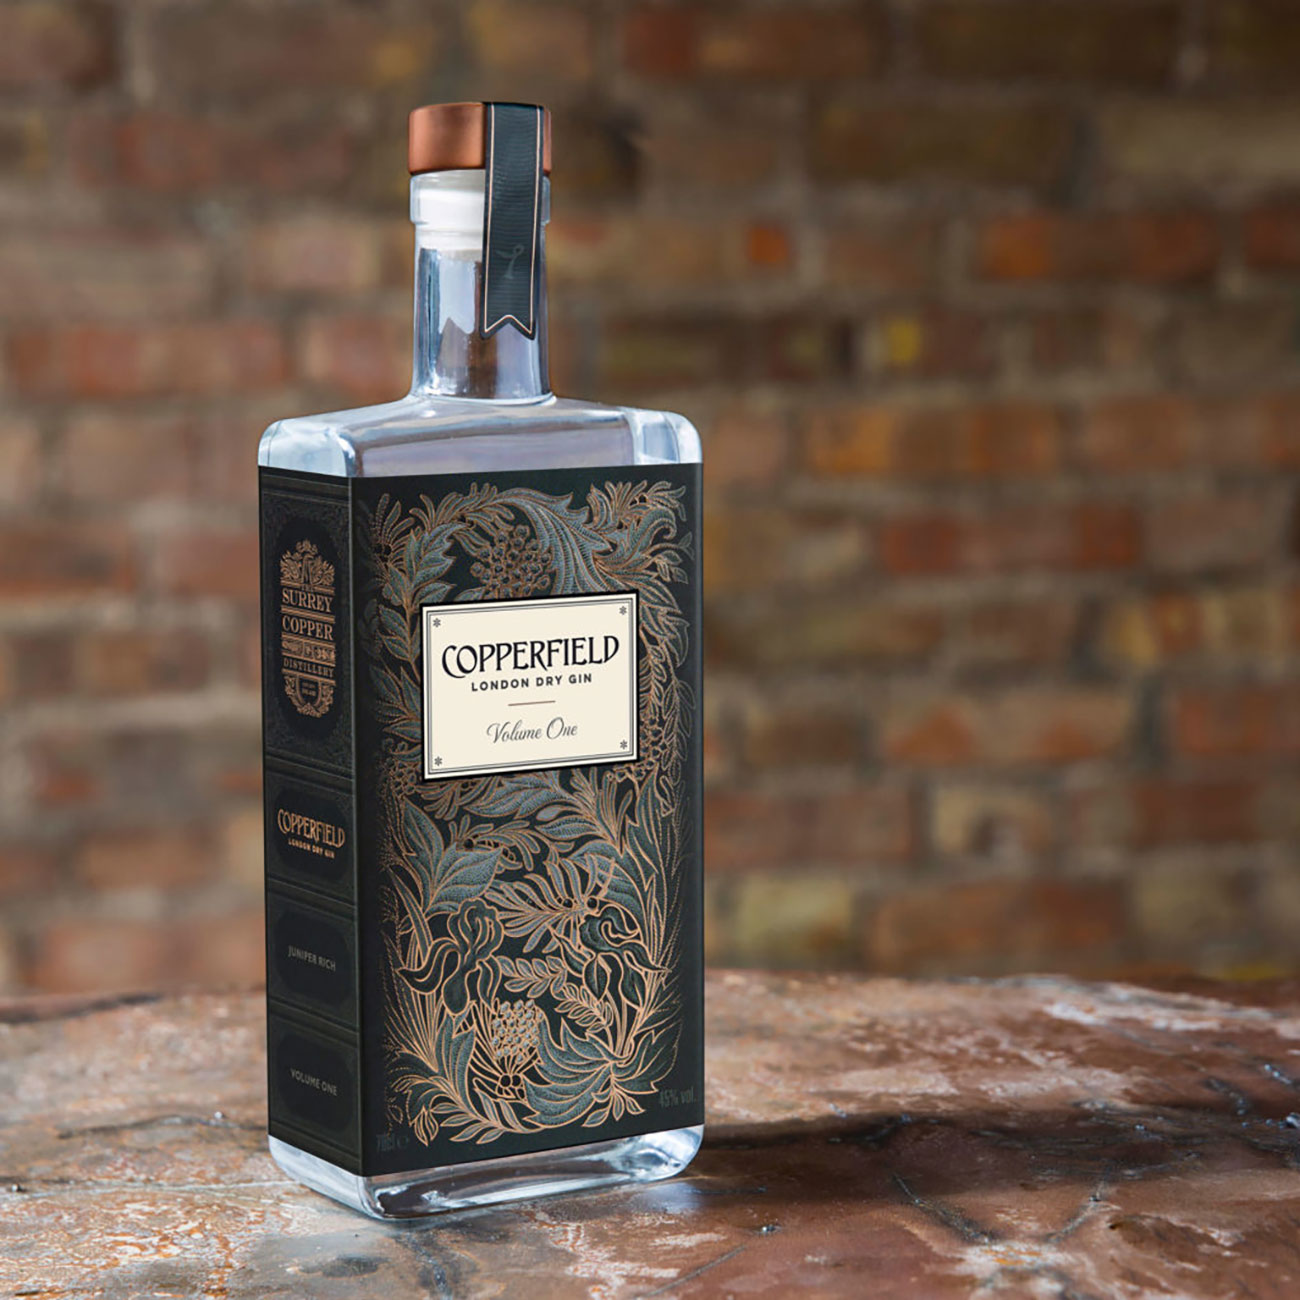 The Surrey Copper Distillery Collection